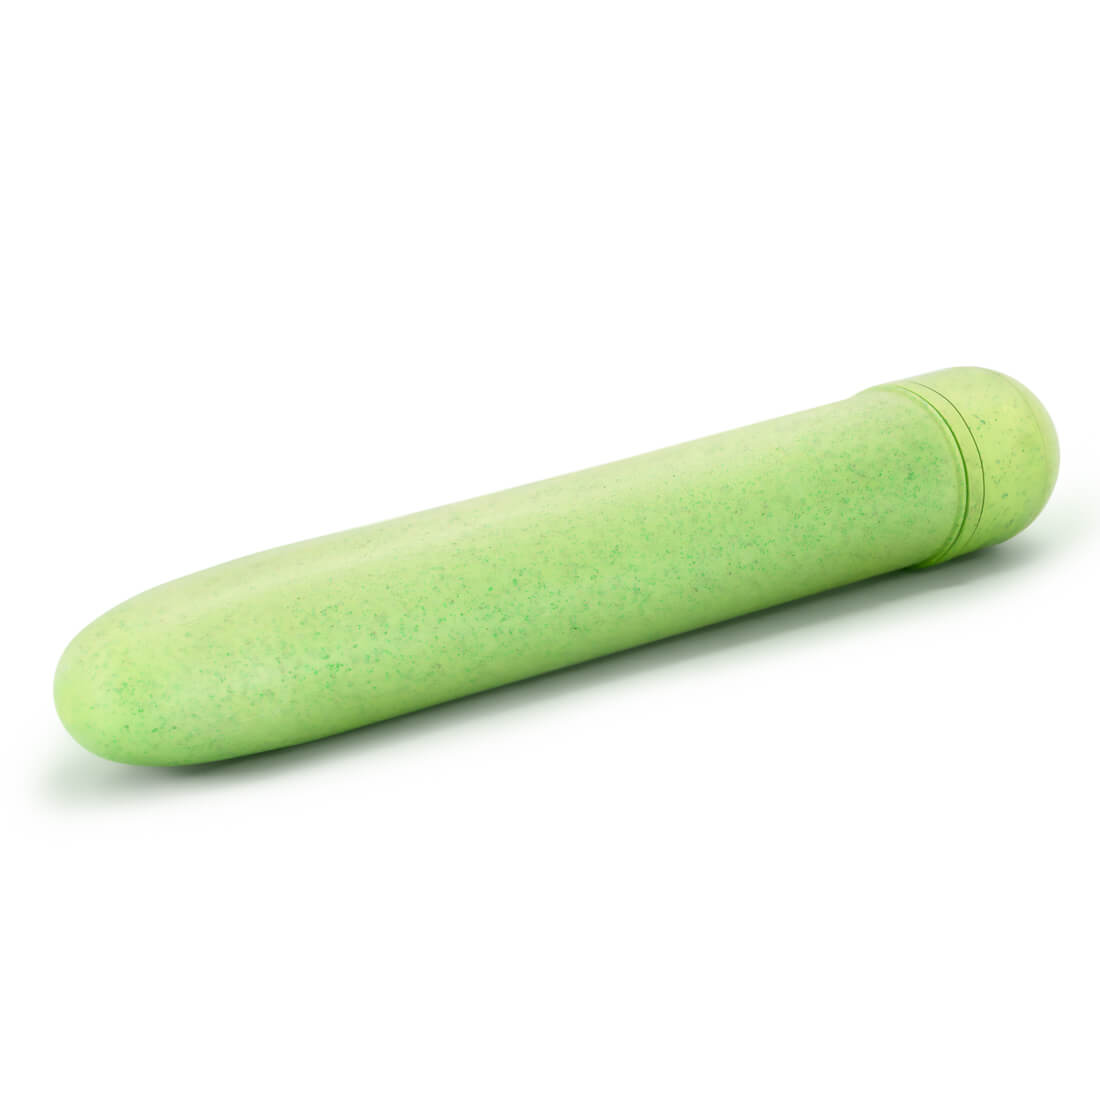 Gaia Eco Biodegradable Vibrator in green color - The Bigger O - online sex toy shop USA, Canada & UK shipping available